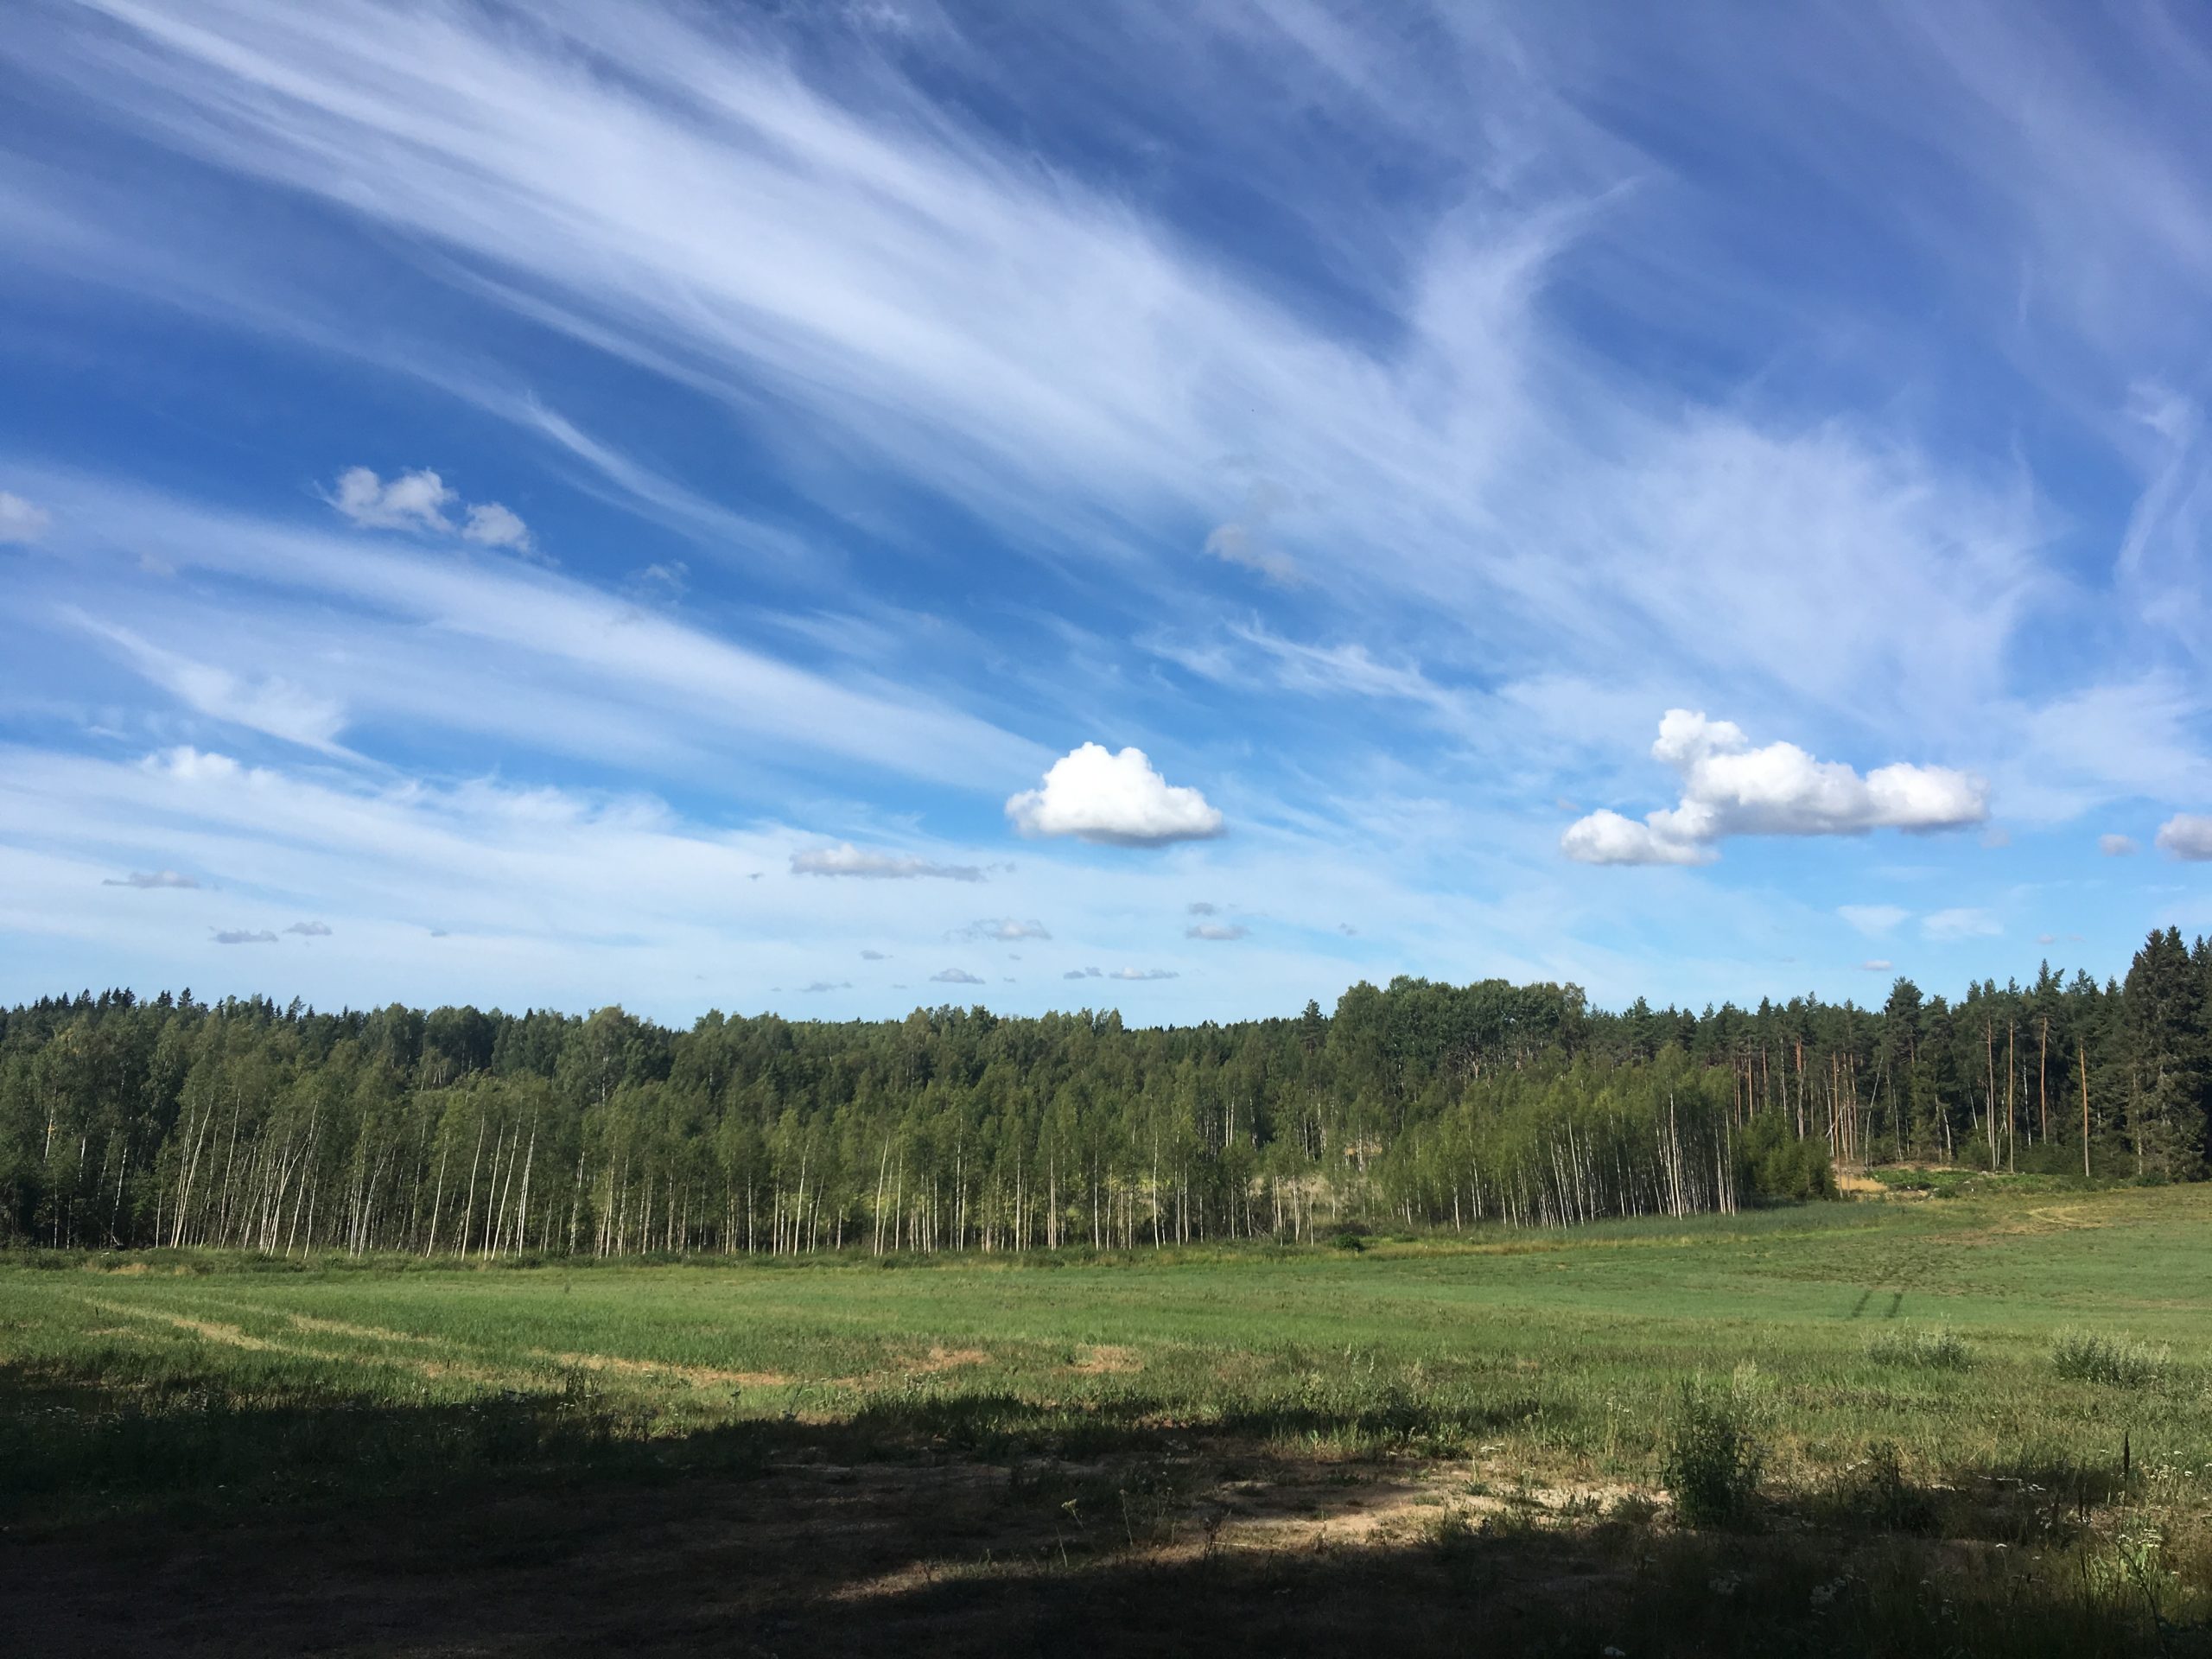 Scandinavian Nature and Forest Therapy Institute och Shinrin-Yoku Sweden